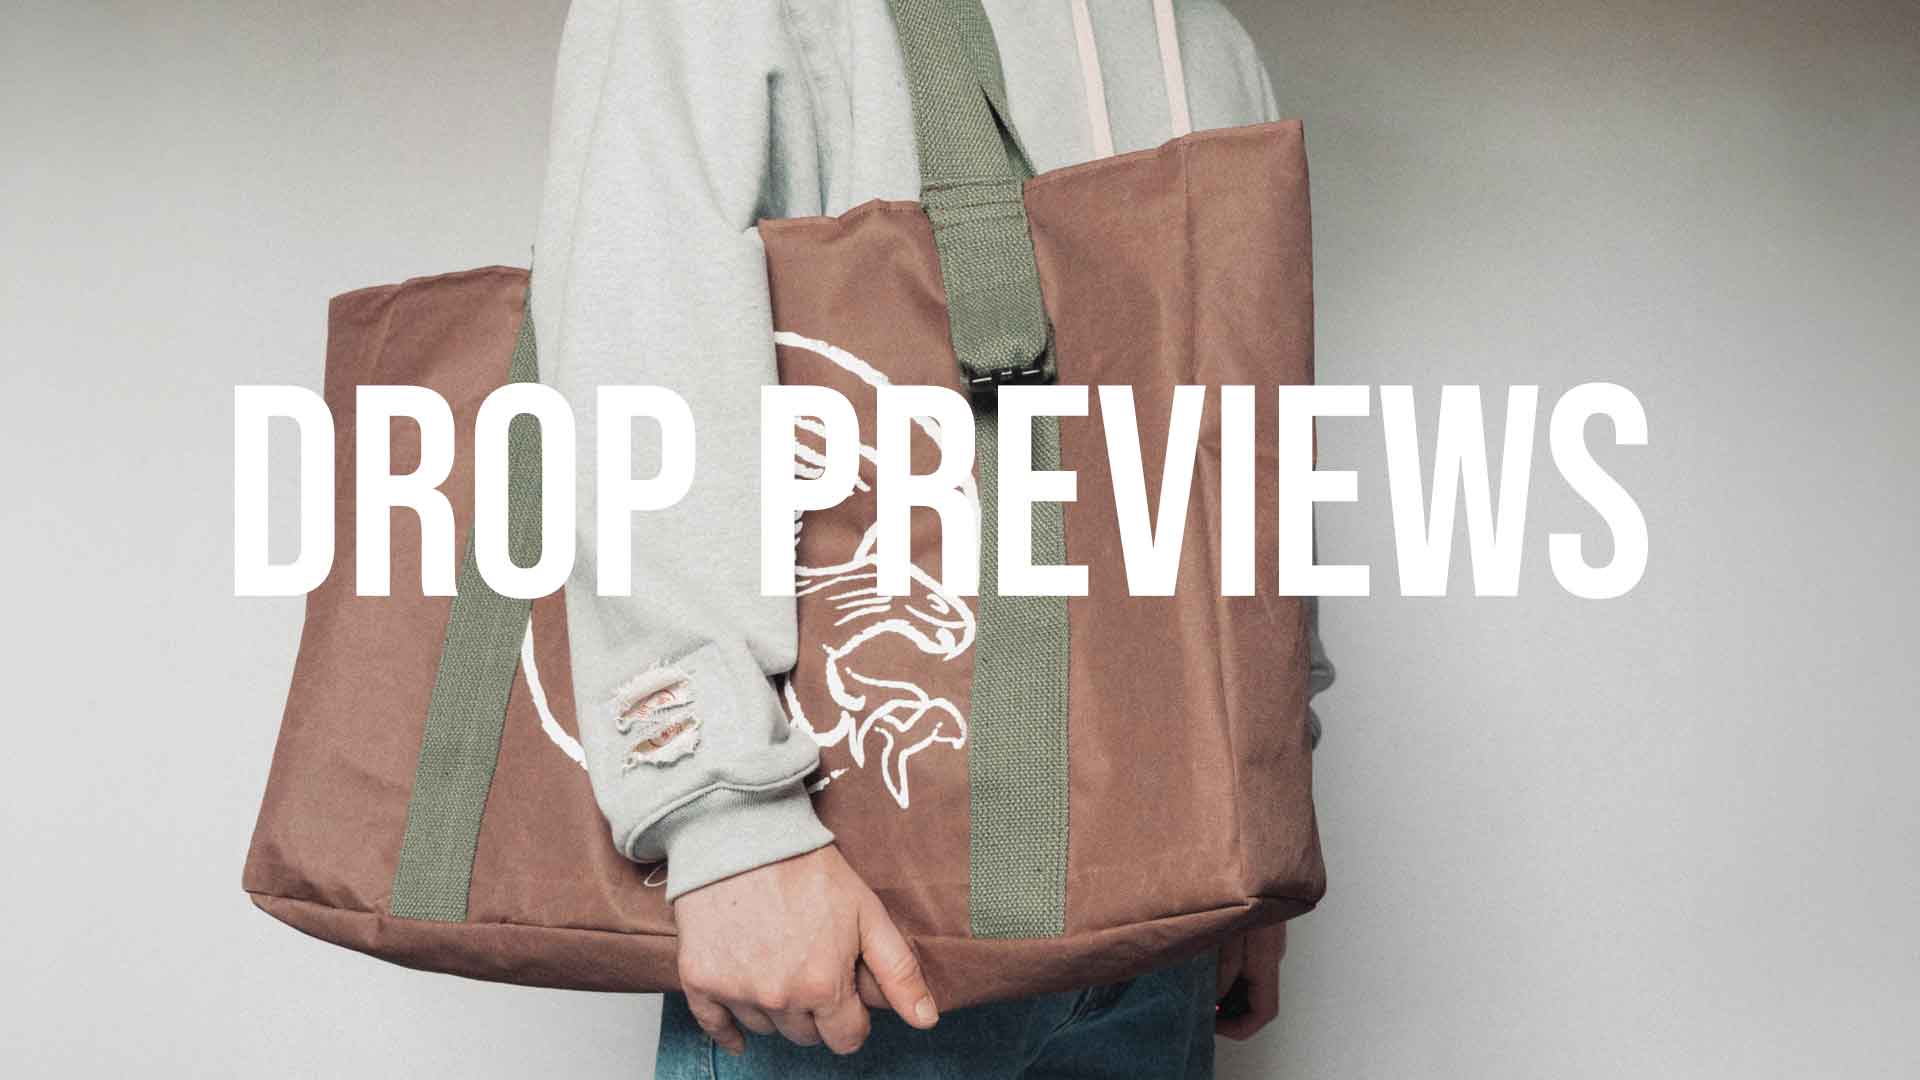 New Releases - Drop One